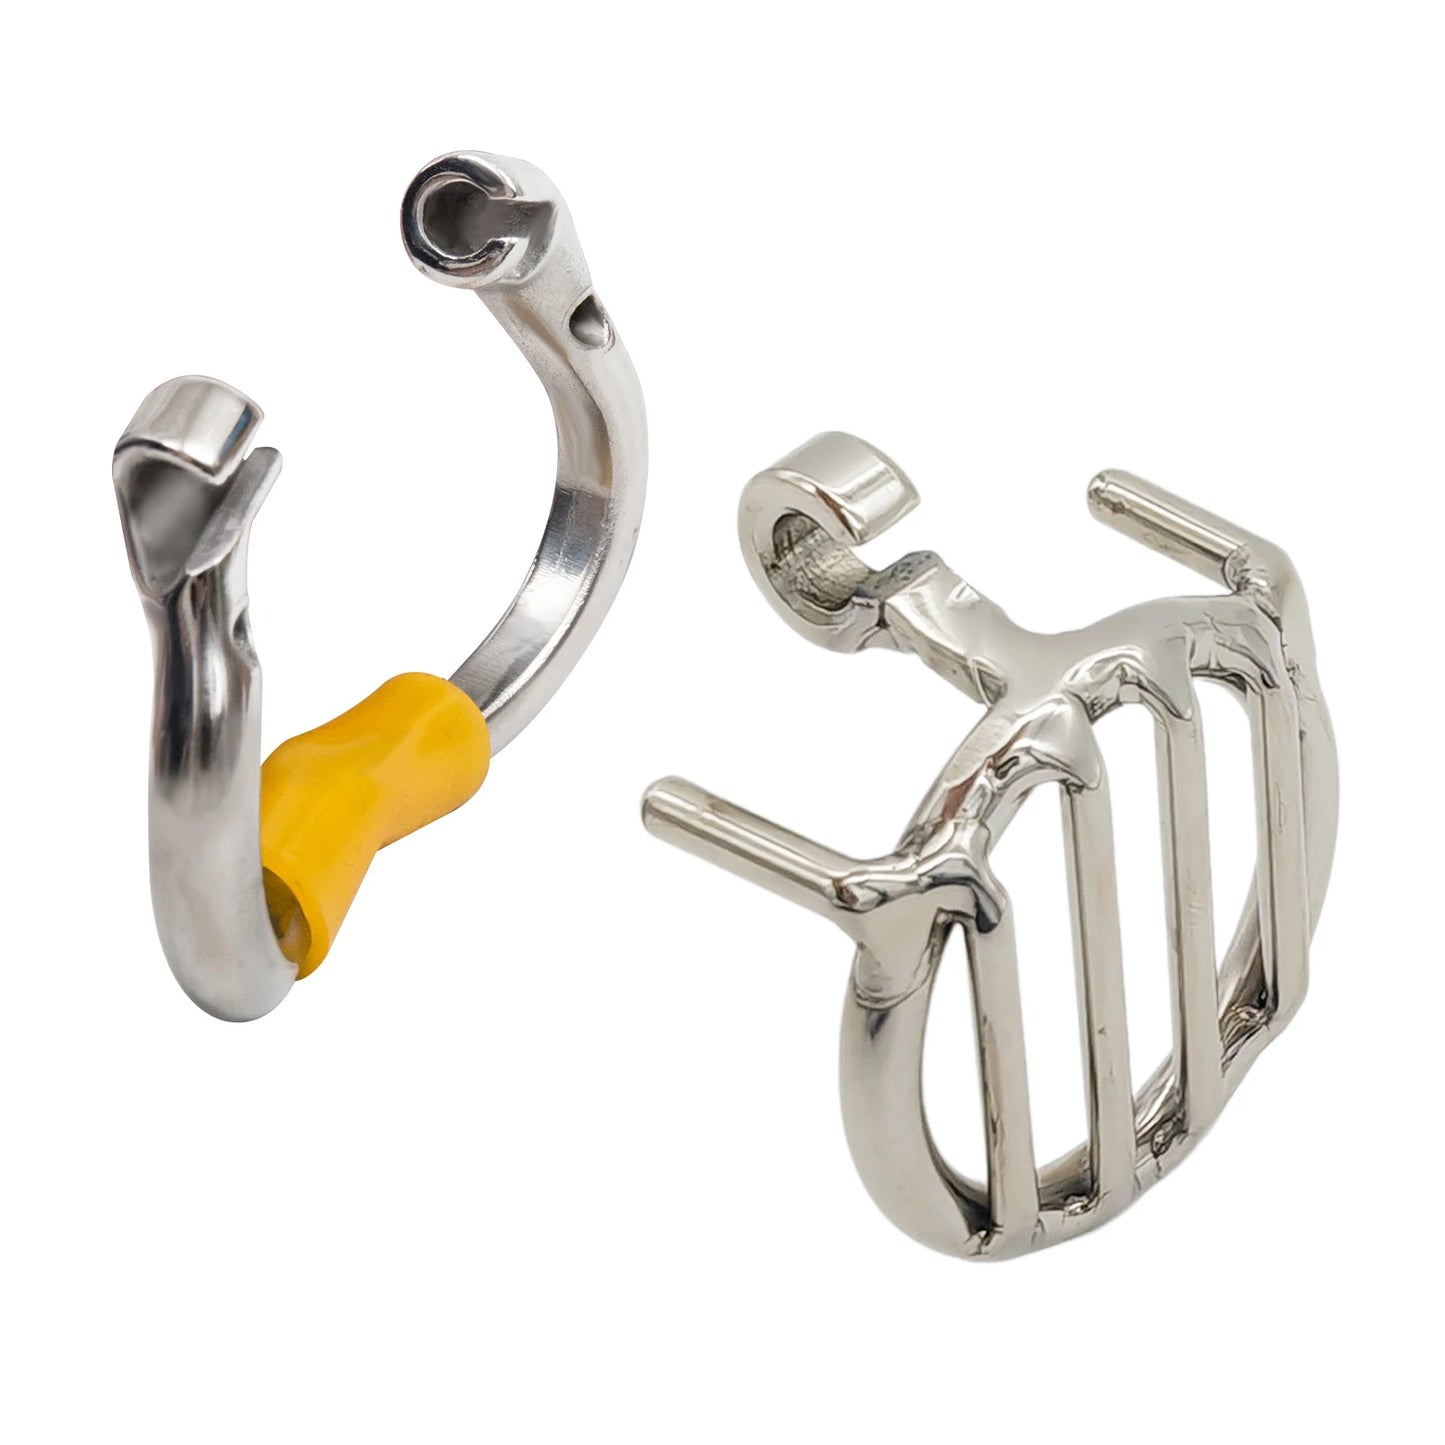 Newest Flat Cage Stainless Steel Male Chastity Device